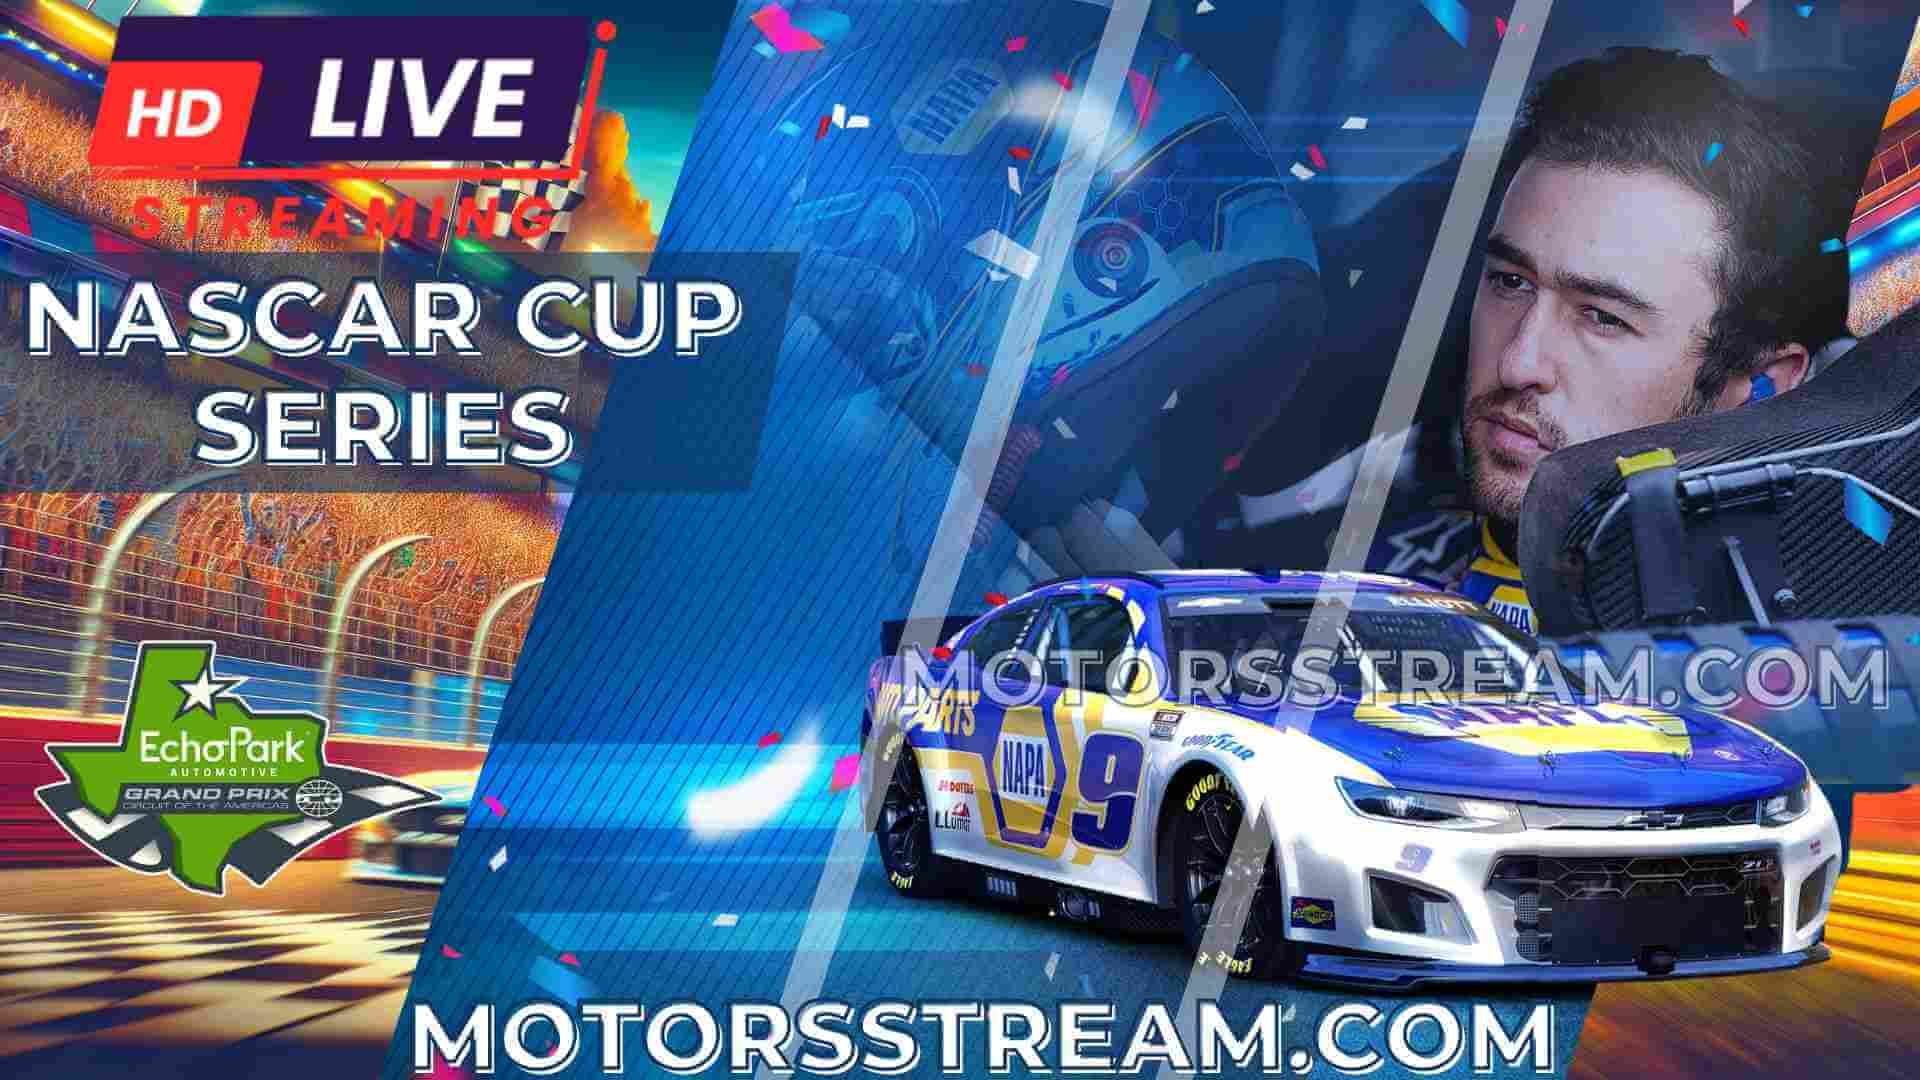 NASCAR Cup Series COTA Race Live Streaming